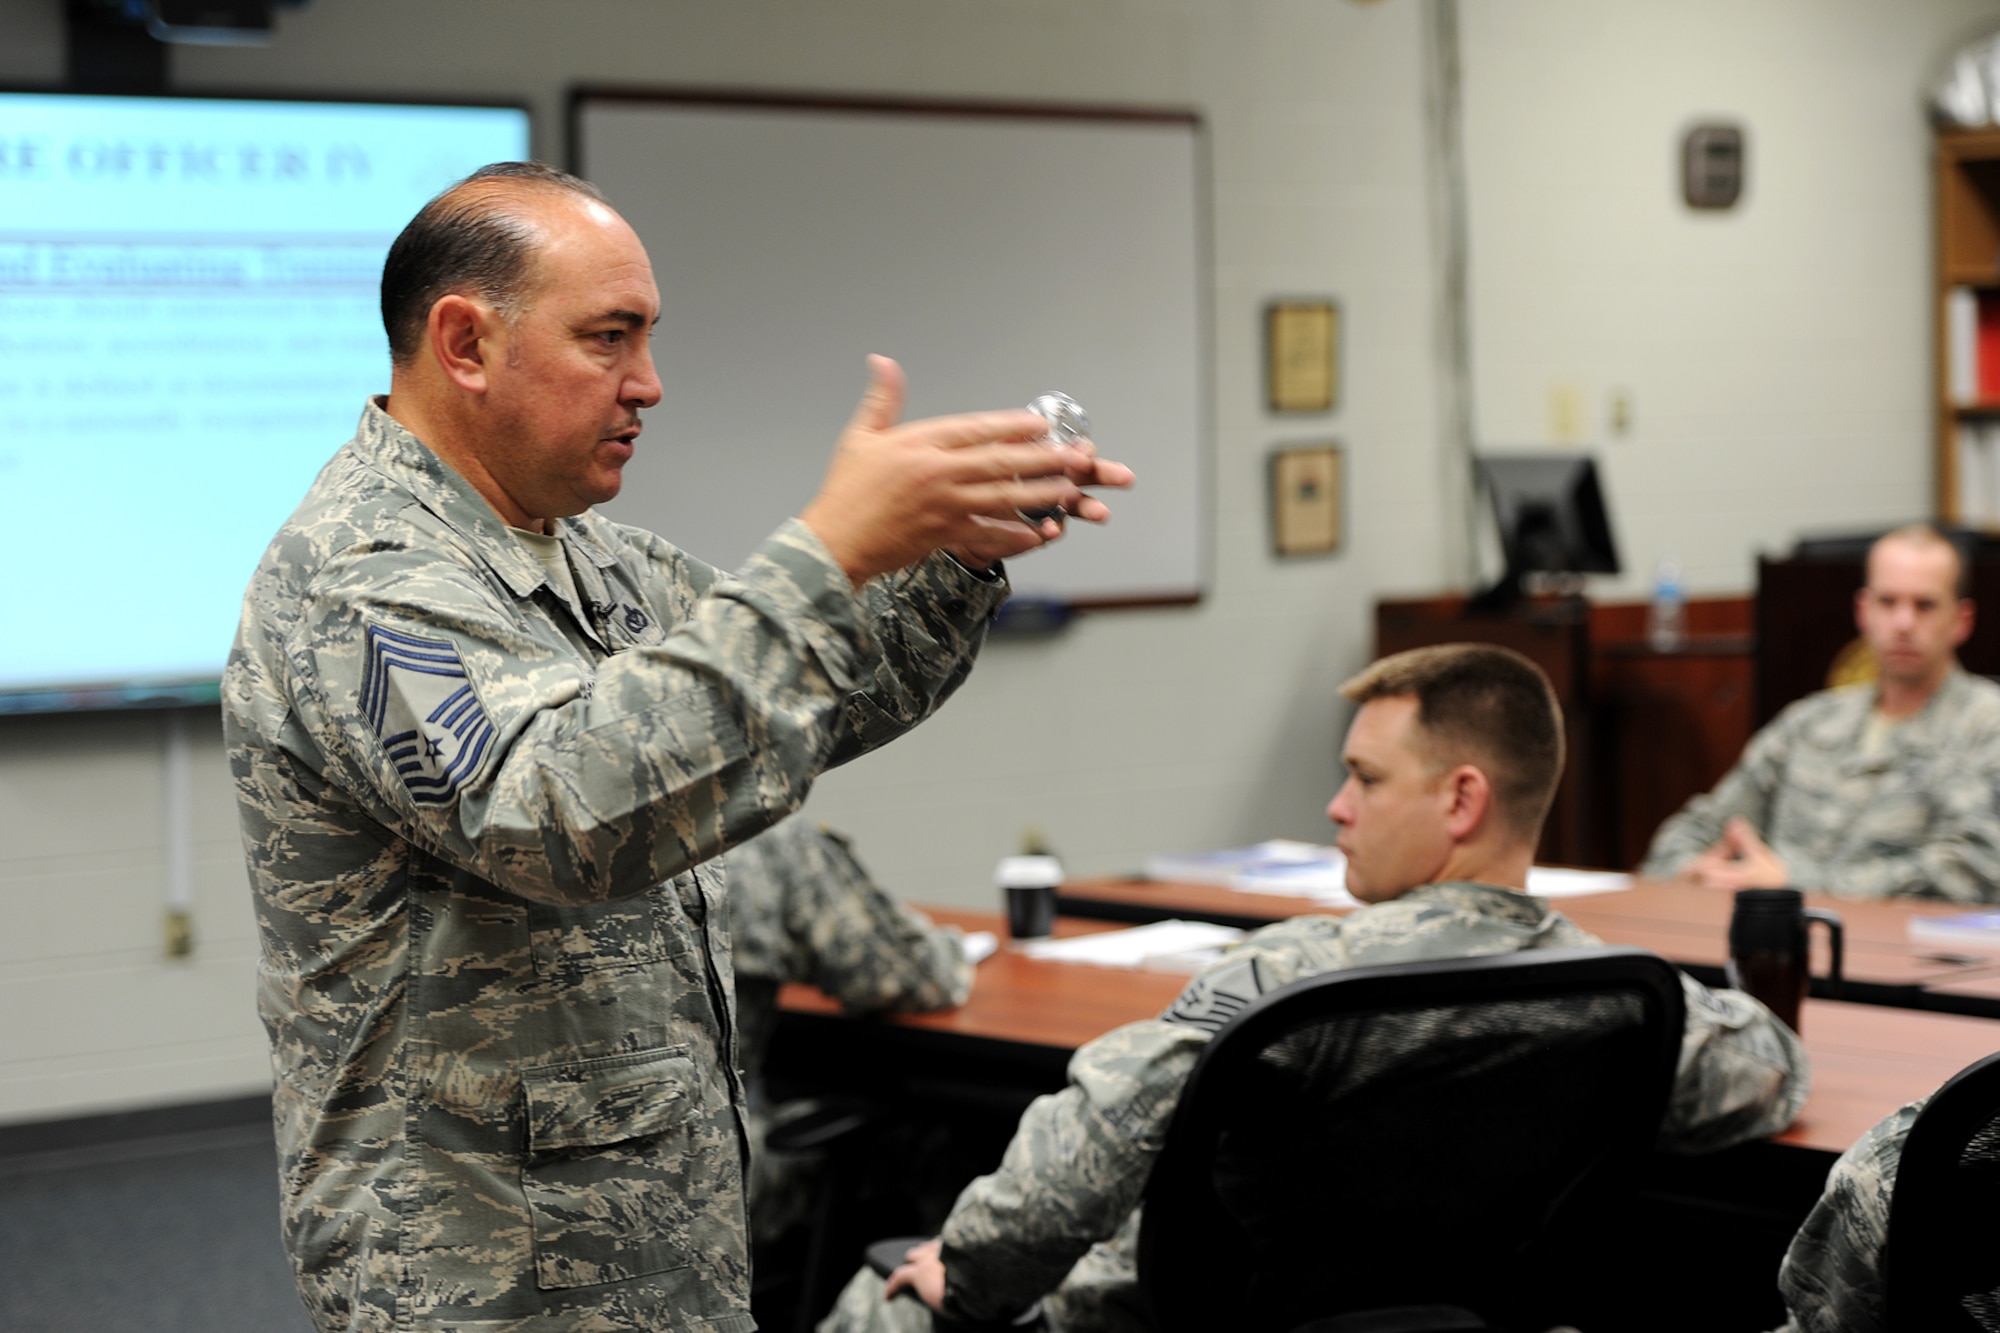 GOODFELLOW AIR FORCE BASE, Texas -- Chief Master Sgt. Jesus Longoria Jr., 312th Training Squadron instructor, gives a lecture during the Fire Officer IV Course at the Louis F. Garland Department of Defense Fire Academy Sept. 19. Longoria explained how chief officers must ensure the existence of adequate education and in-service training programs. In-service training programs are an ongoing process to ensure firefighters maintain the skills needed to perform operations. (U.S. Air Force photo/ Airman 1st Class Devin Boyer)